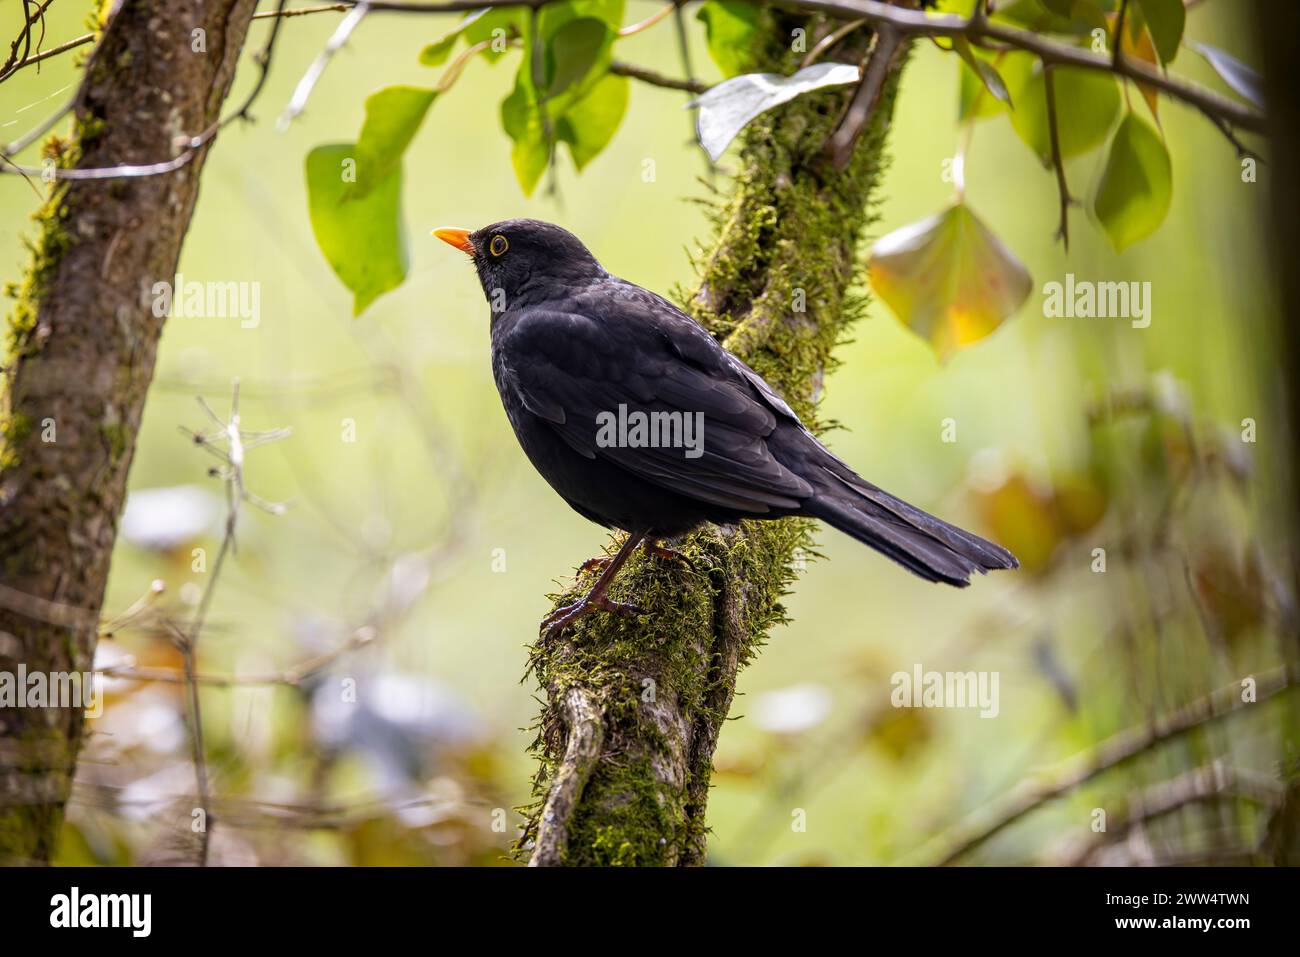 Close up of a male blackbird with brightb yellow beak and eye ring perched on a mossy branch. Stock Photo